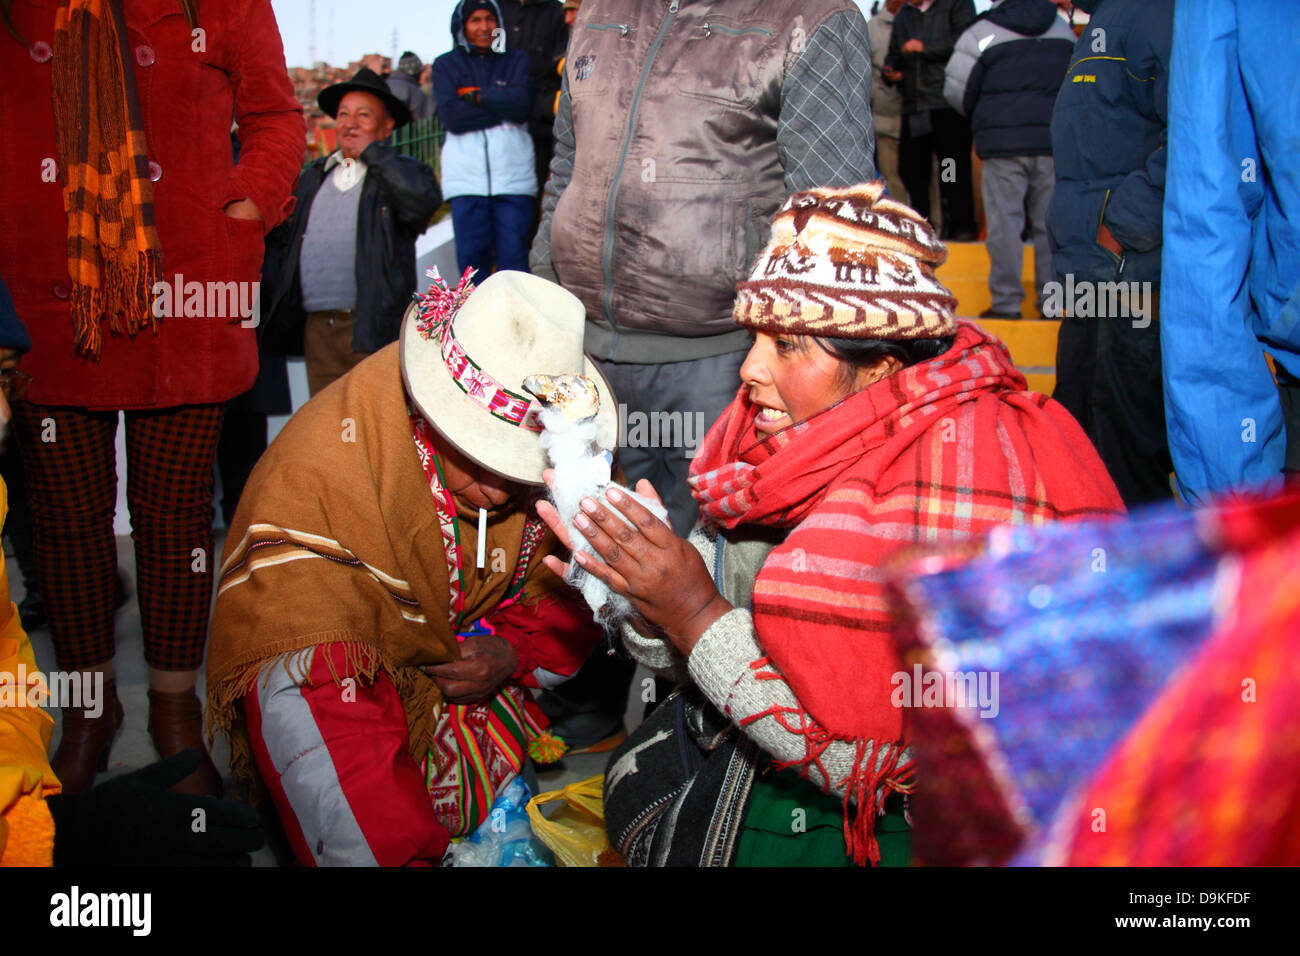 Magical Andes Photography  Aymara woman shopping at stall selling red and  yellow underwear on New Year's Eve, La Paz, Bolivia photograph